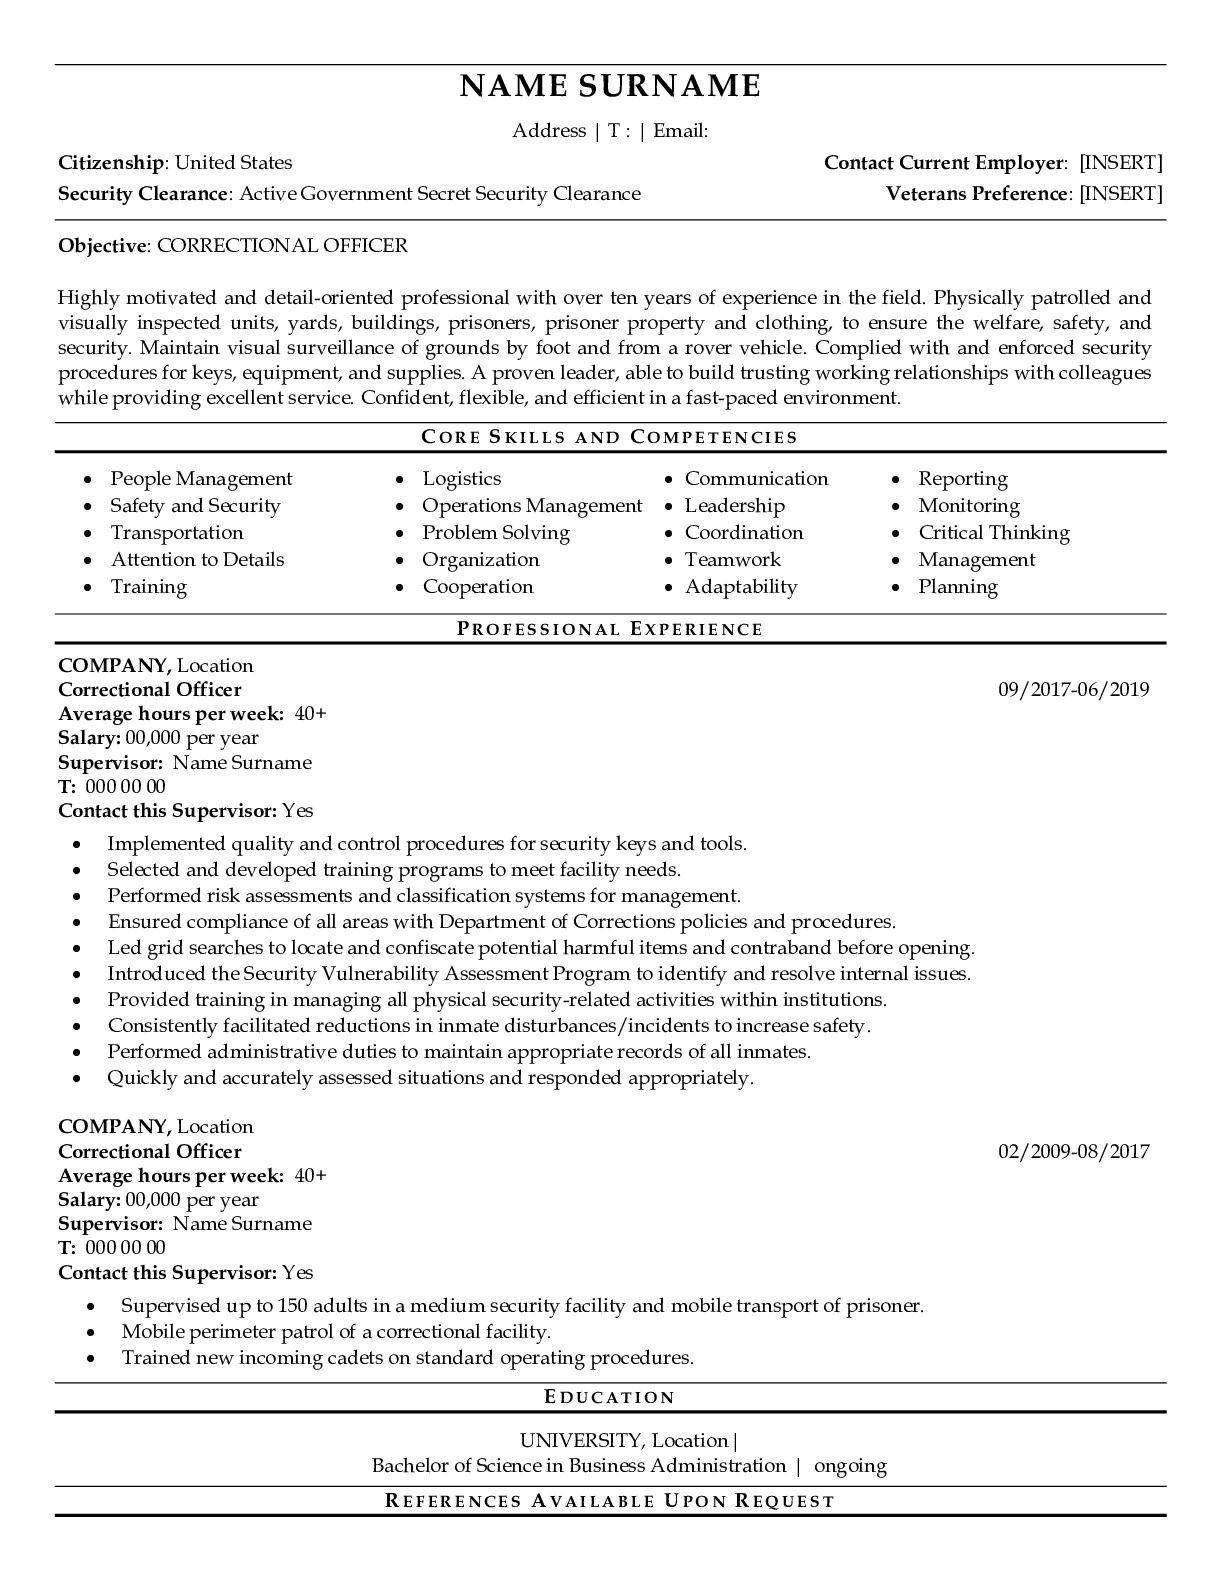 Resume Example for Correctional Officer